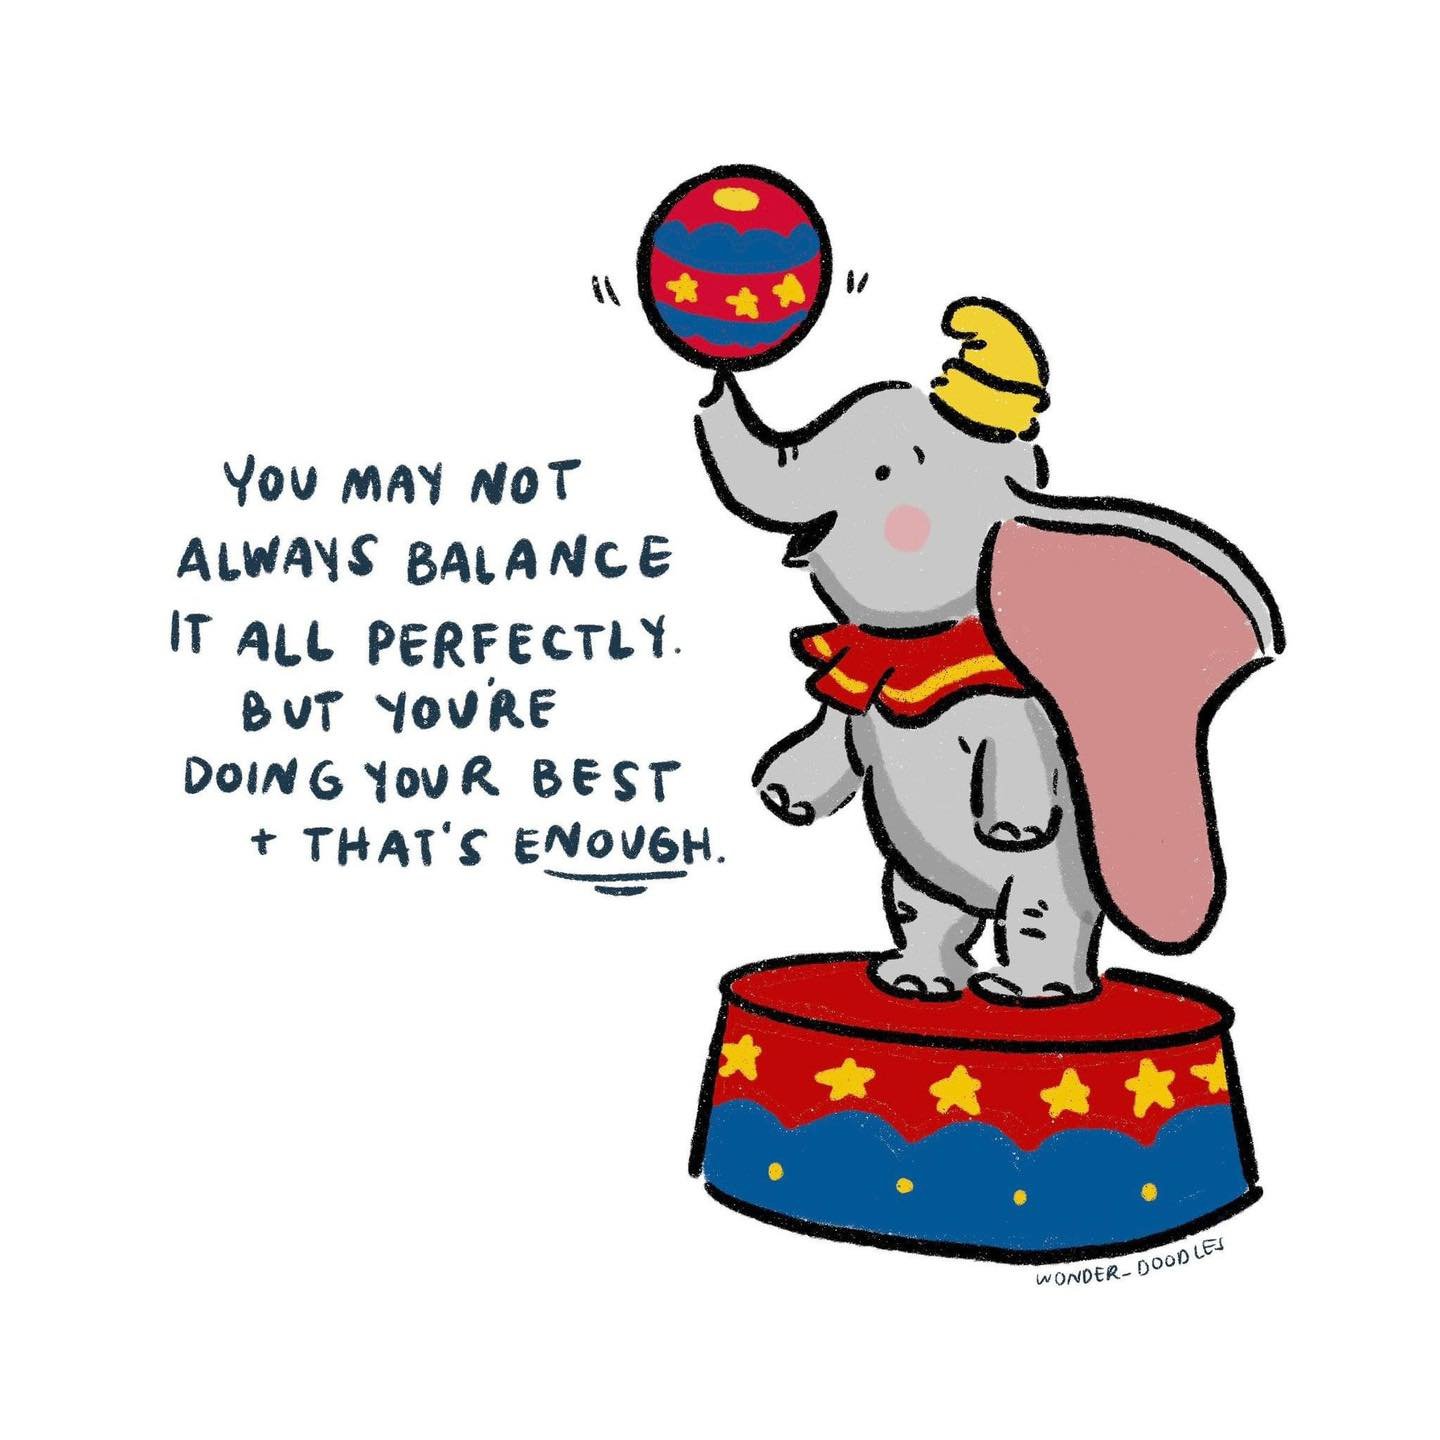 &quot;You may not always balance it all perfectly, but you're doing your best + that is enough.&quot;

We understand that life can be a juggling act. 🤹&zwj;♂️ As therapists, parents, caregivers, + champions for children, we strive to give our all ev